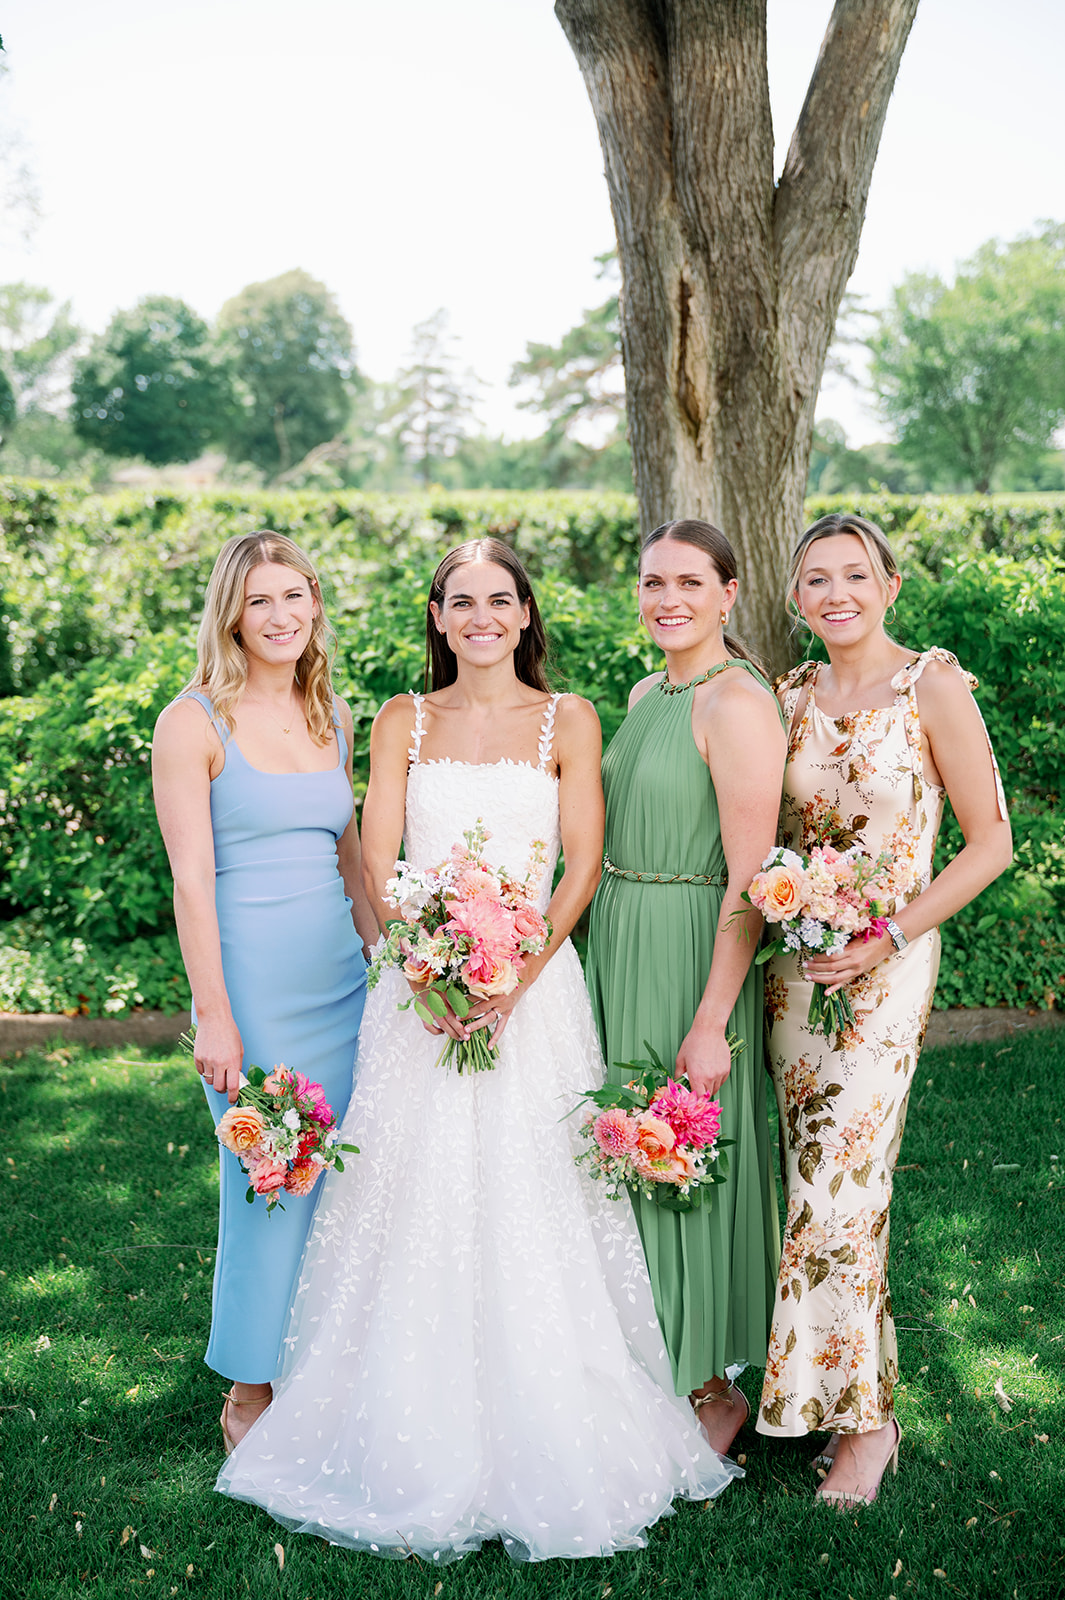 Carly and her three bridesmaids in mismatched summer dresses holding pink floral bouquets with a garden backdrop.